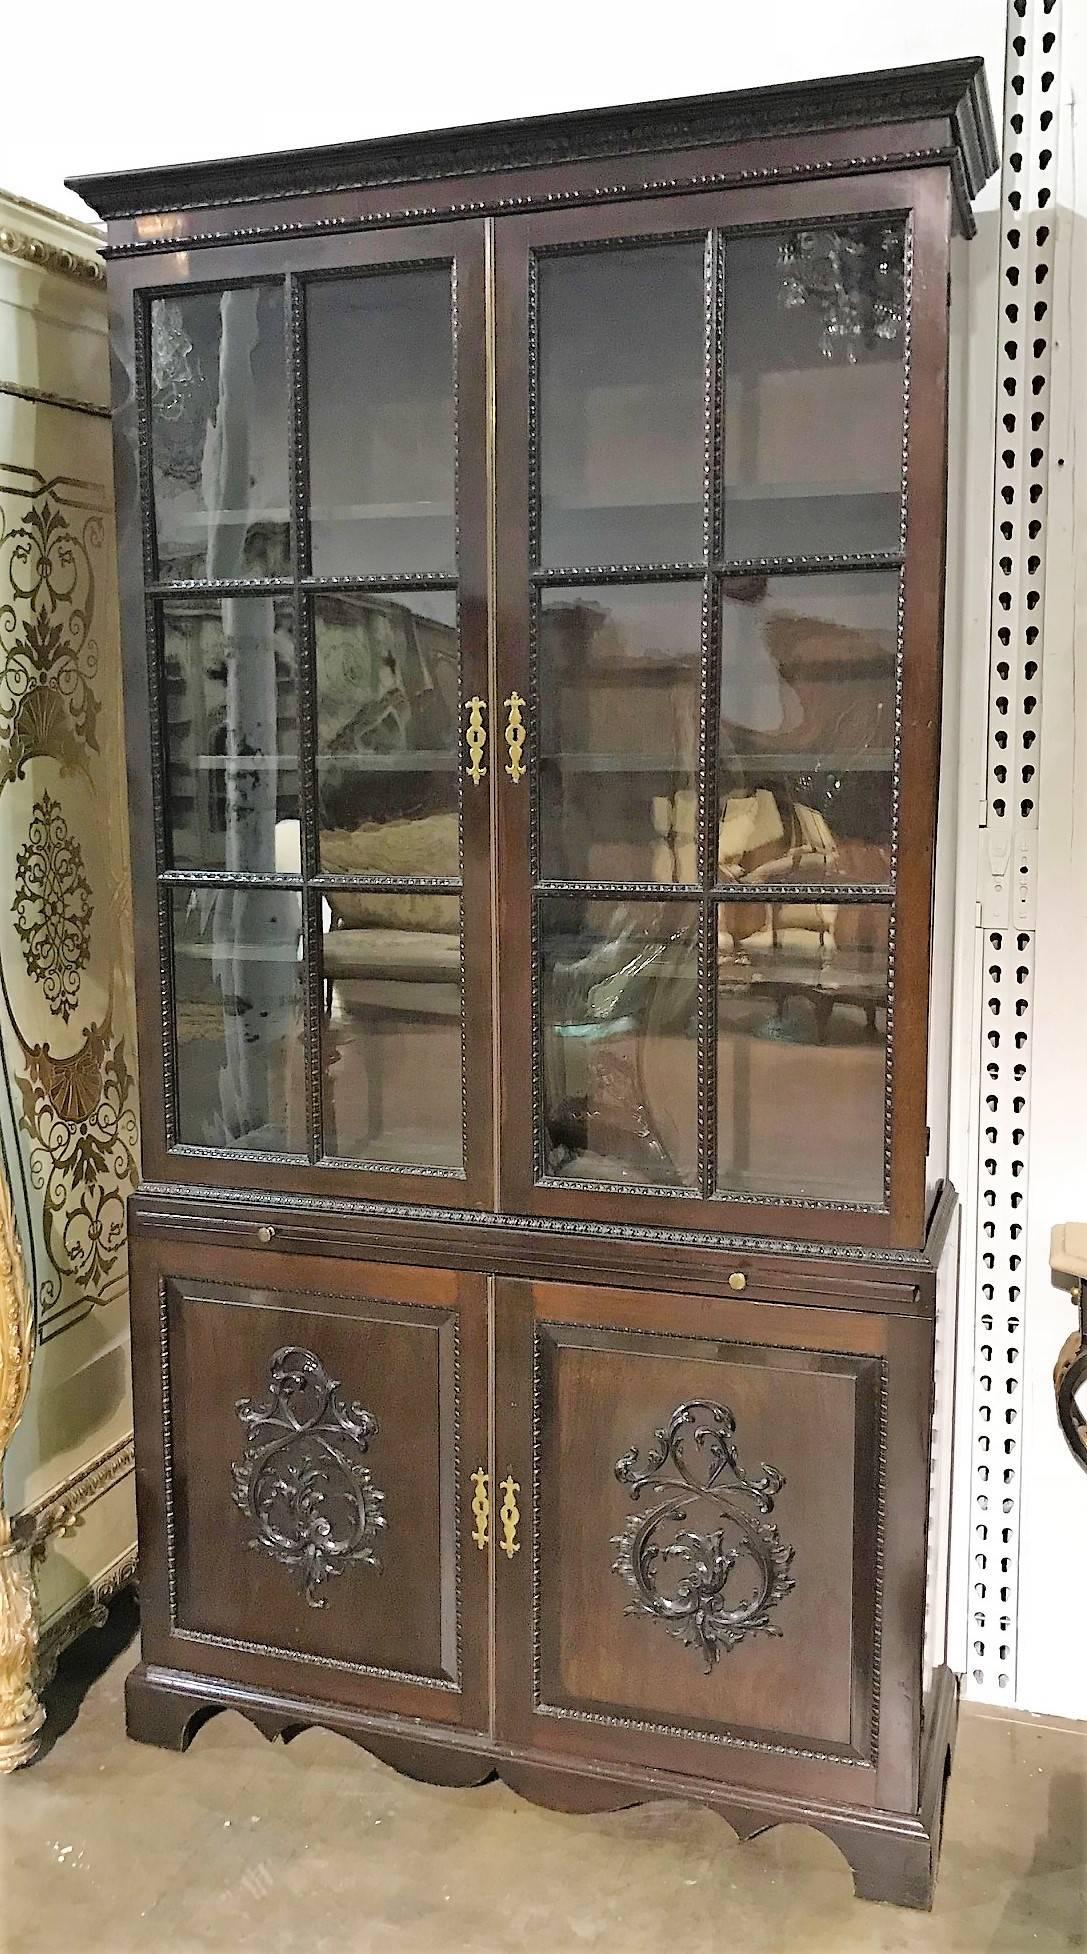 Superb English Chippendale/Georgian design mahogany bookcase with glazed paned double doors with carved moldings atop a pull-out writing slide and raised paneled cupboards having hand-carved leaf scrolls in relief. The entire on shaped bracket